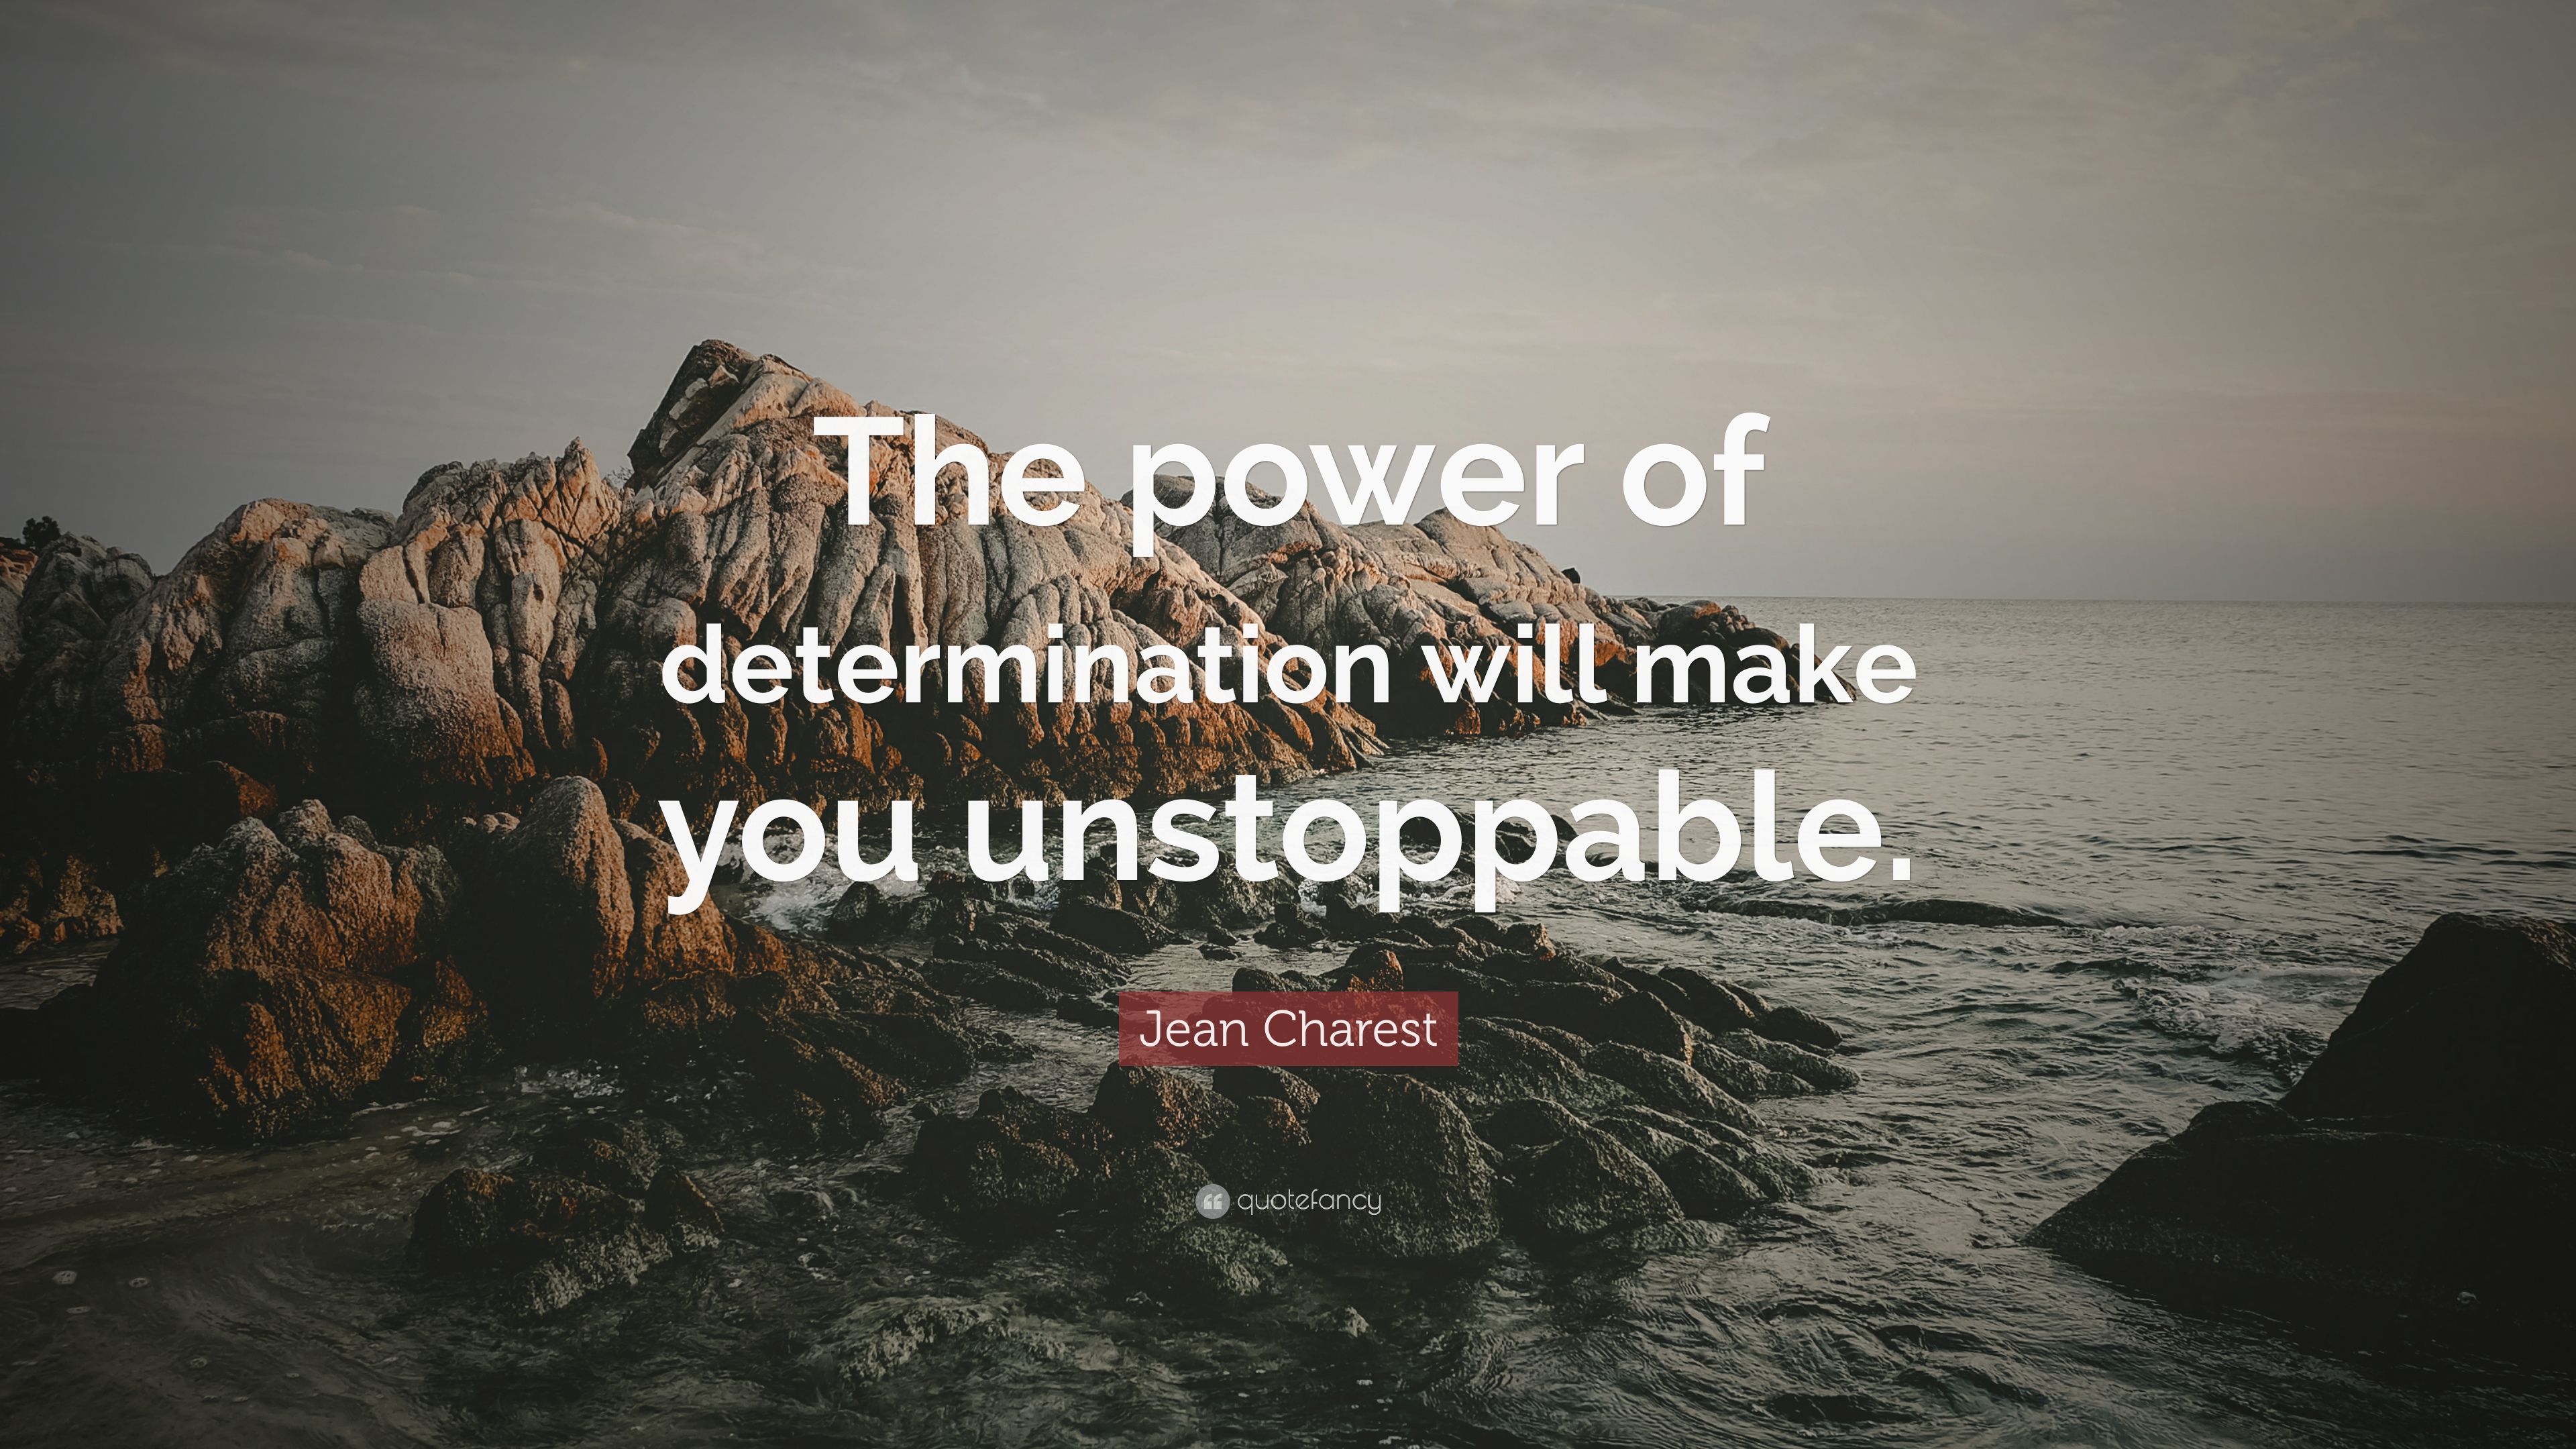 Jean Charest Quote: “The power of determination will make you unstoppable.” (7 wallpaper)